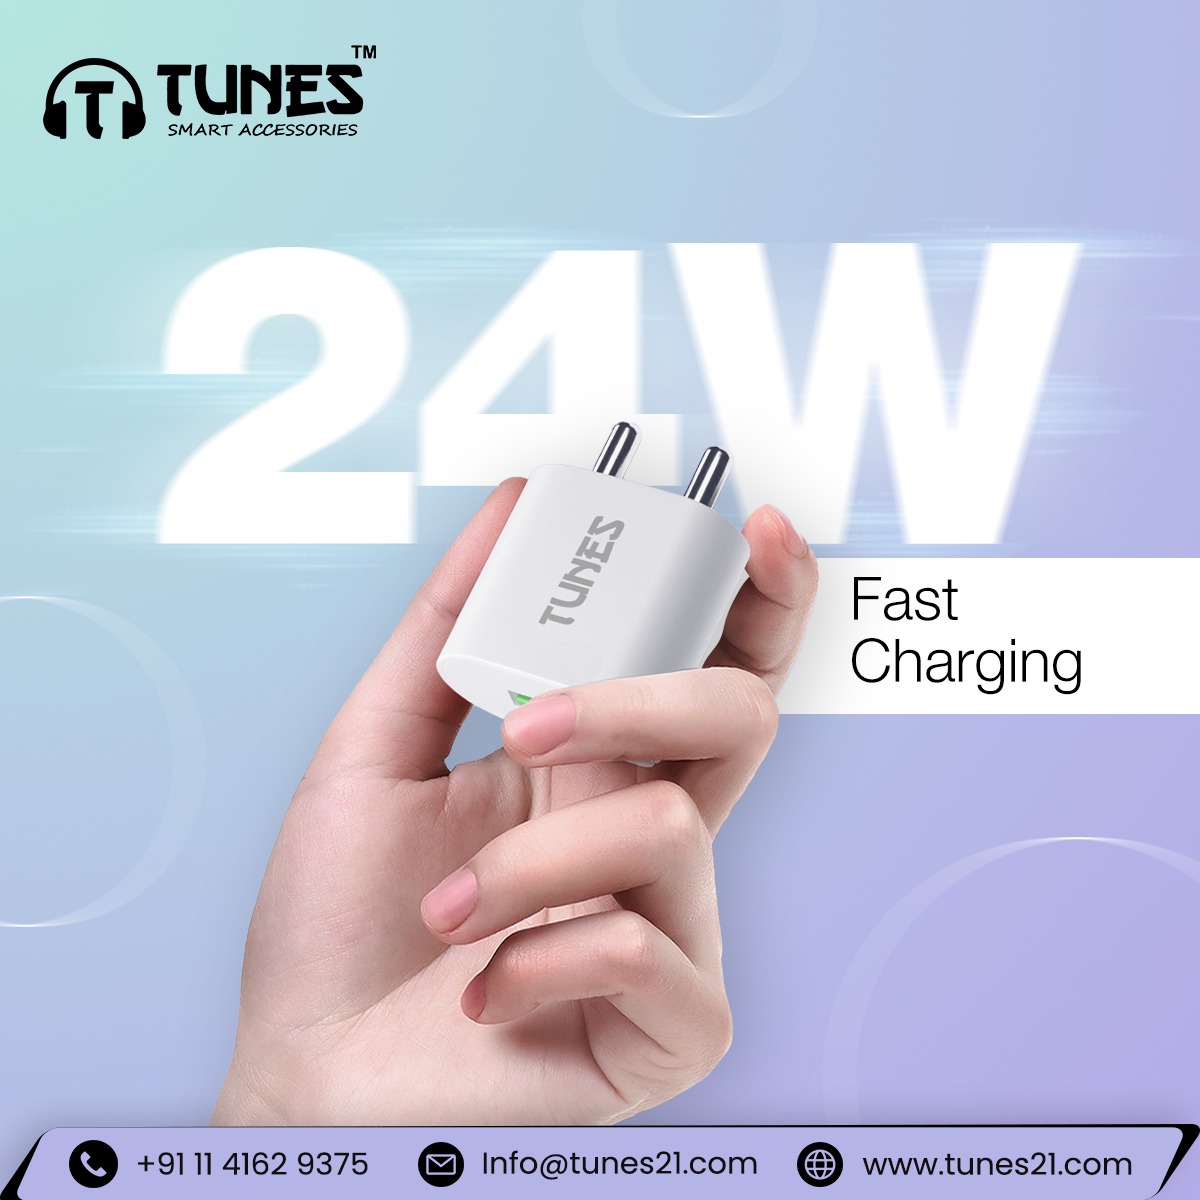 Here is New Tunes 24W Single Output Fast Charger Technology......
For information and orders please contact us✔️
tunes21.com

.
.
.

#tunes #staytunedformore #shopping #gadgetshop #gadgetlife #charger #NeckbandEarphones #fastcharger #charger
.